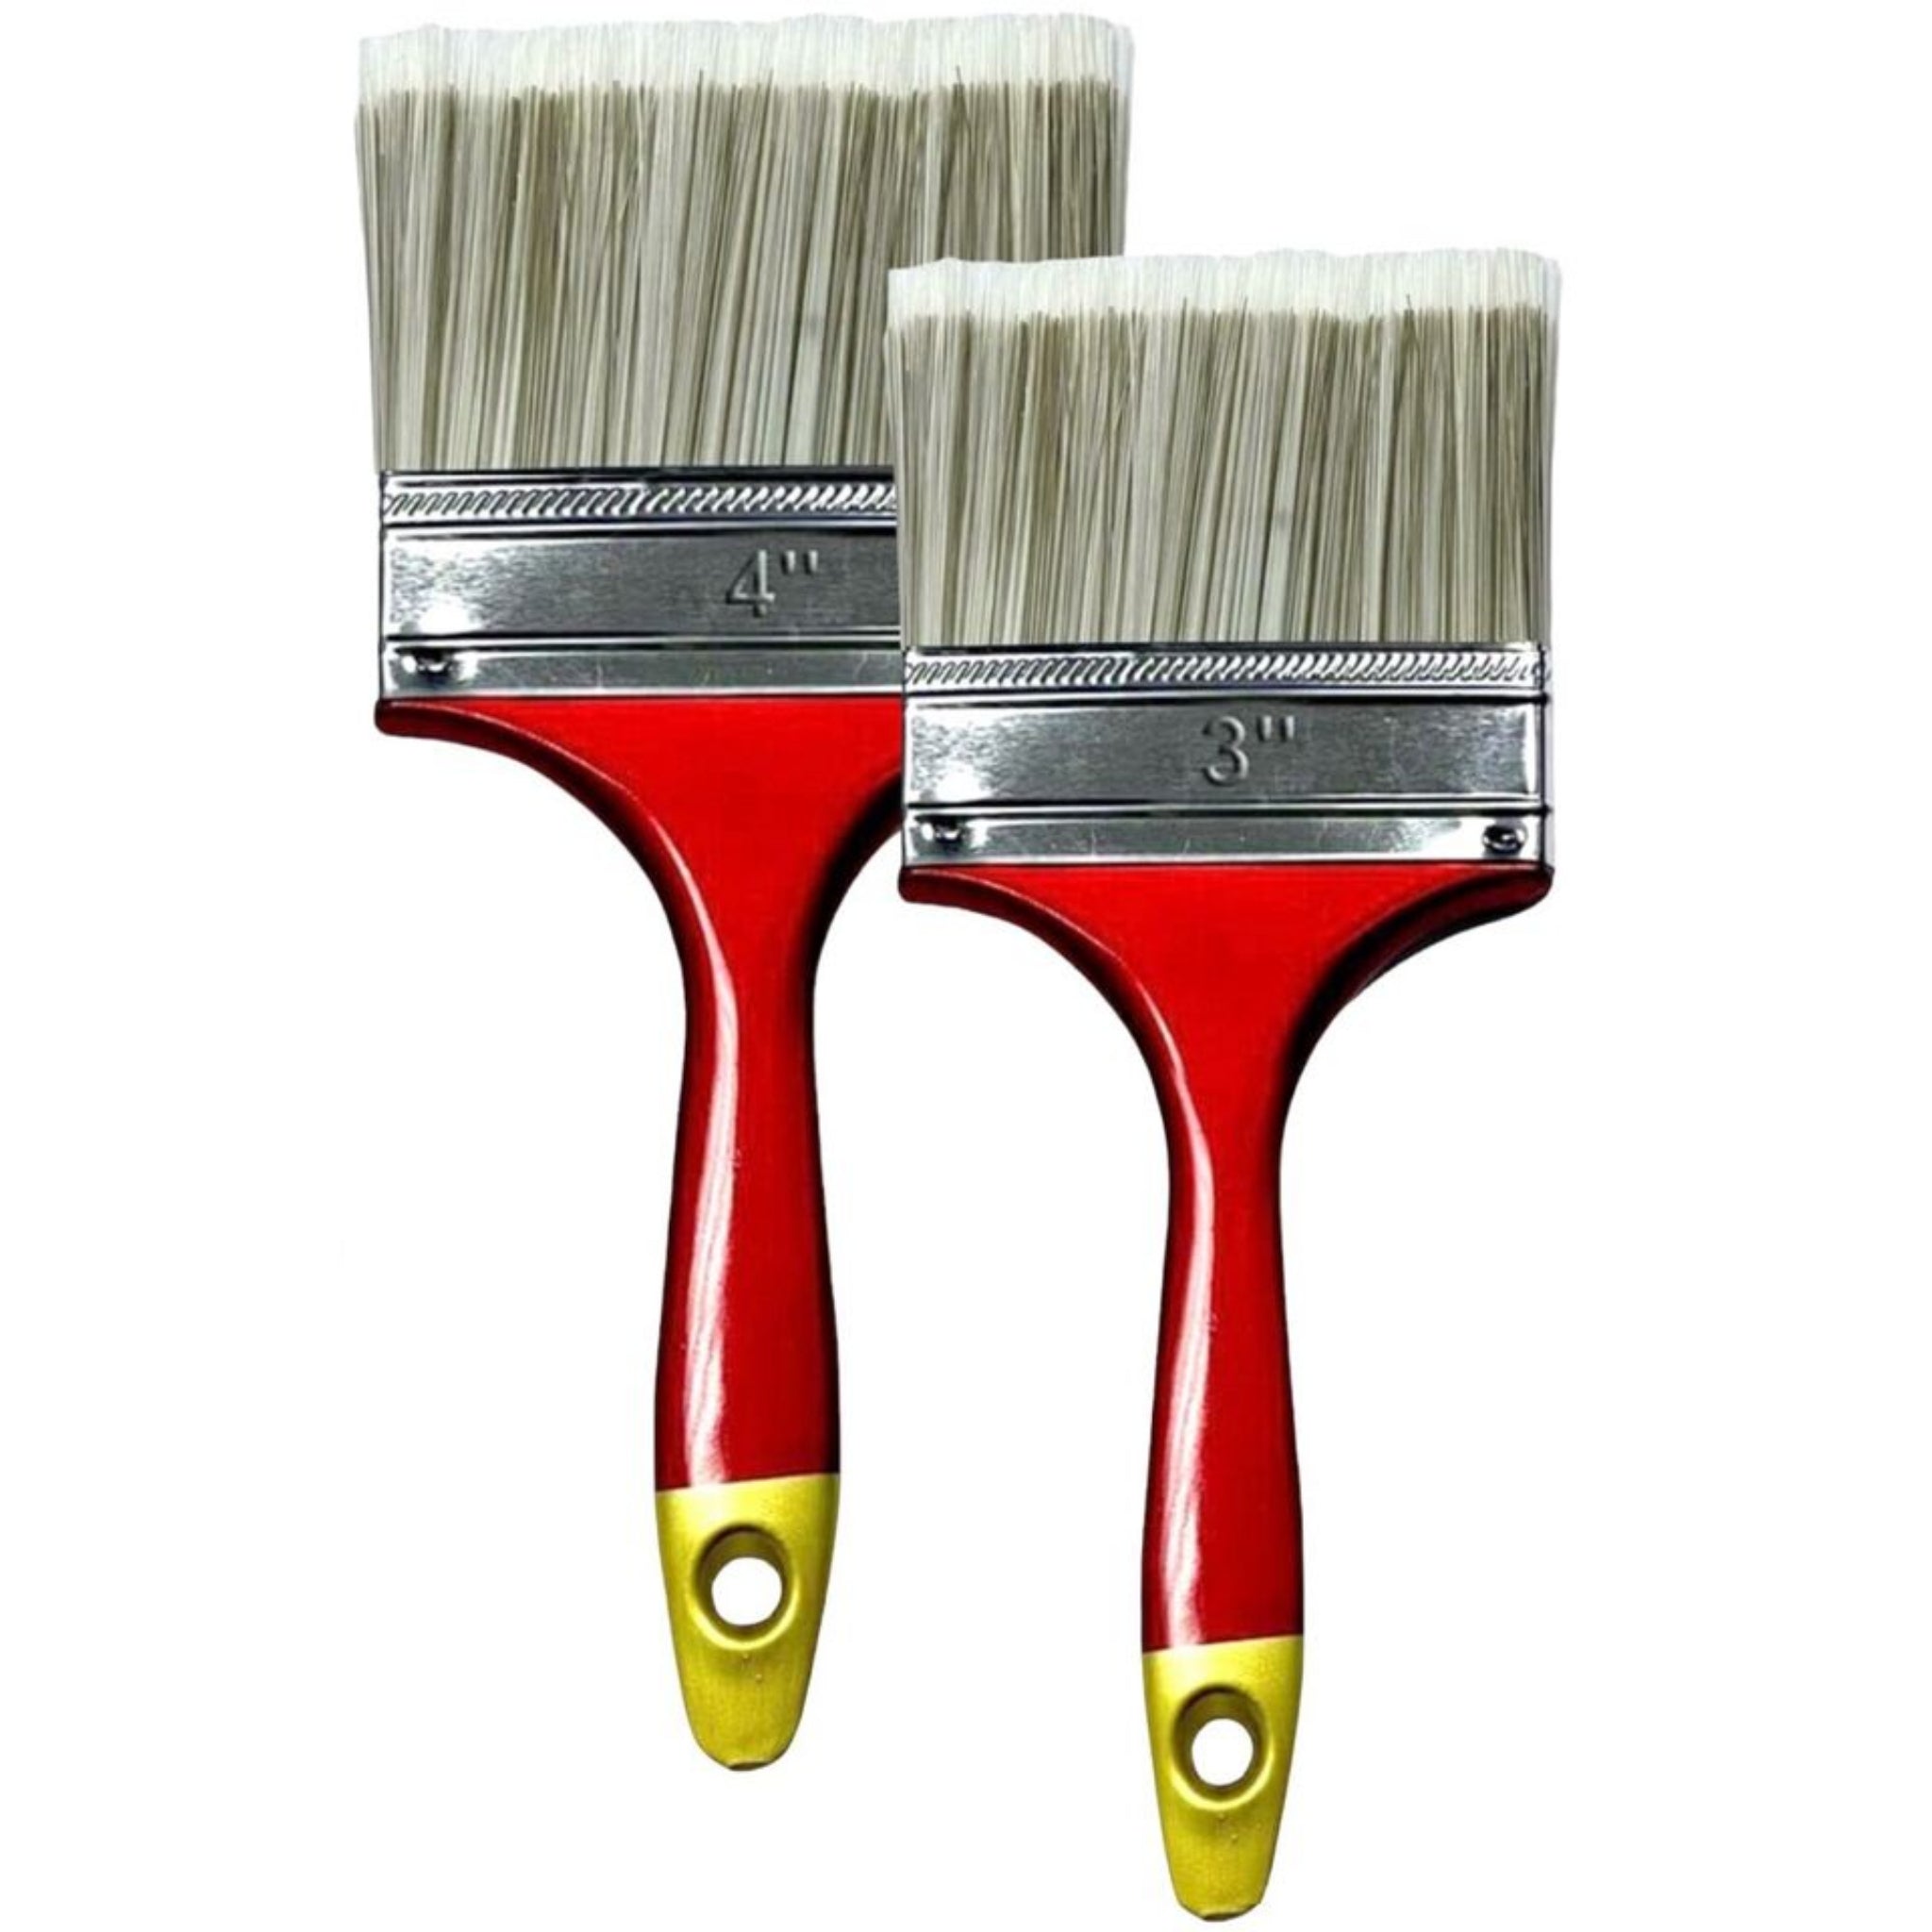 Beclen Harp 3" & 4" Inch Paint Brush Brushes Decorating Diy Wall Fence Home Decks House Wood